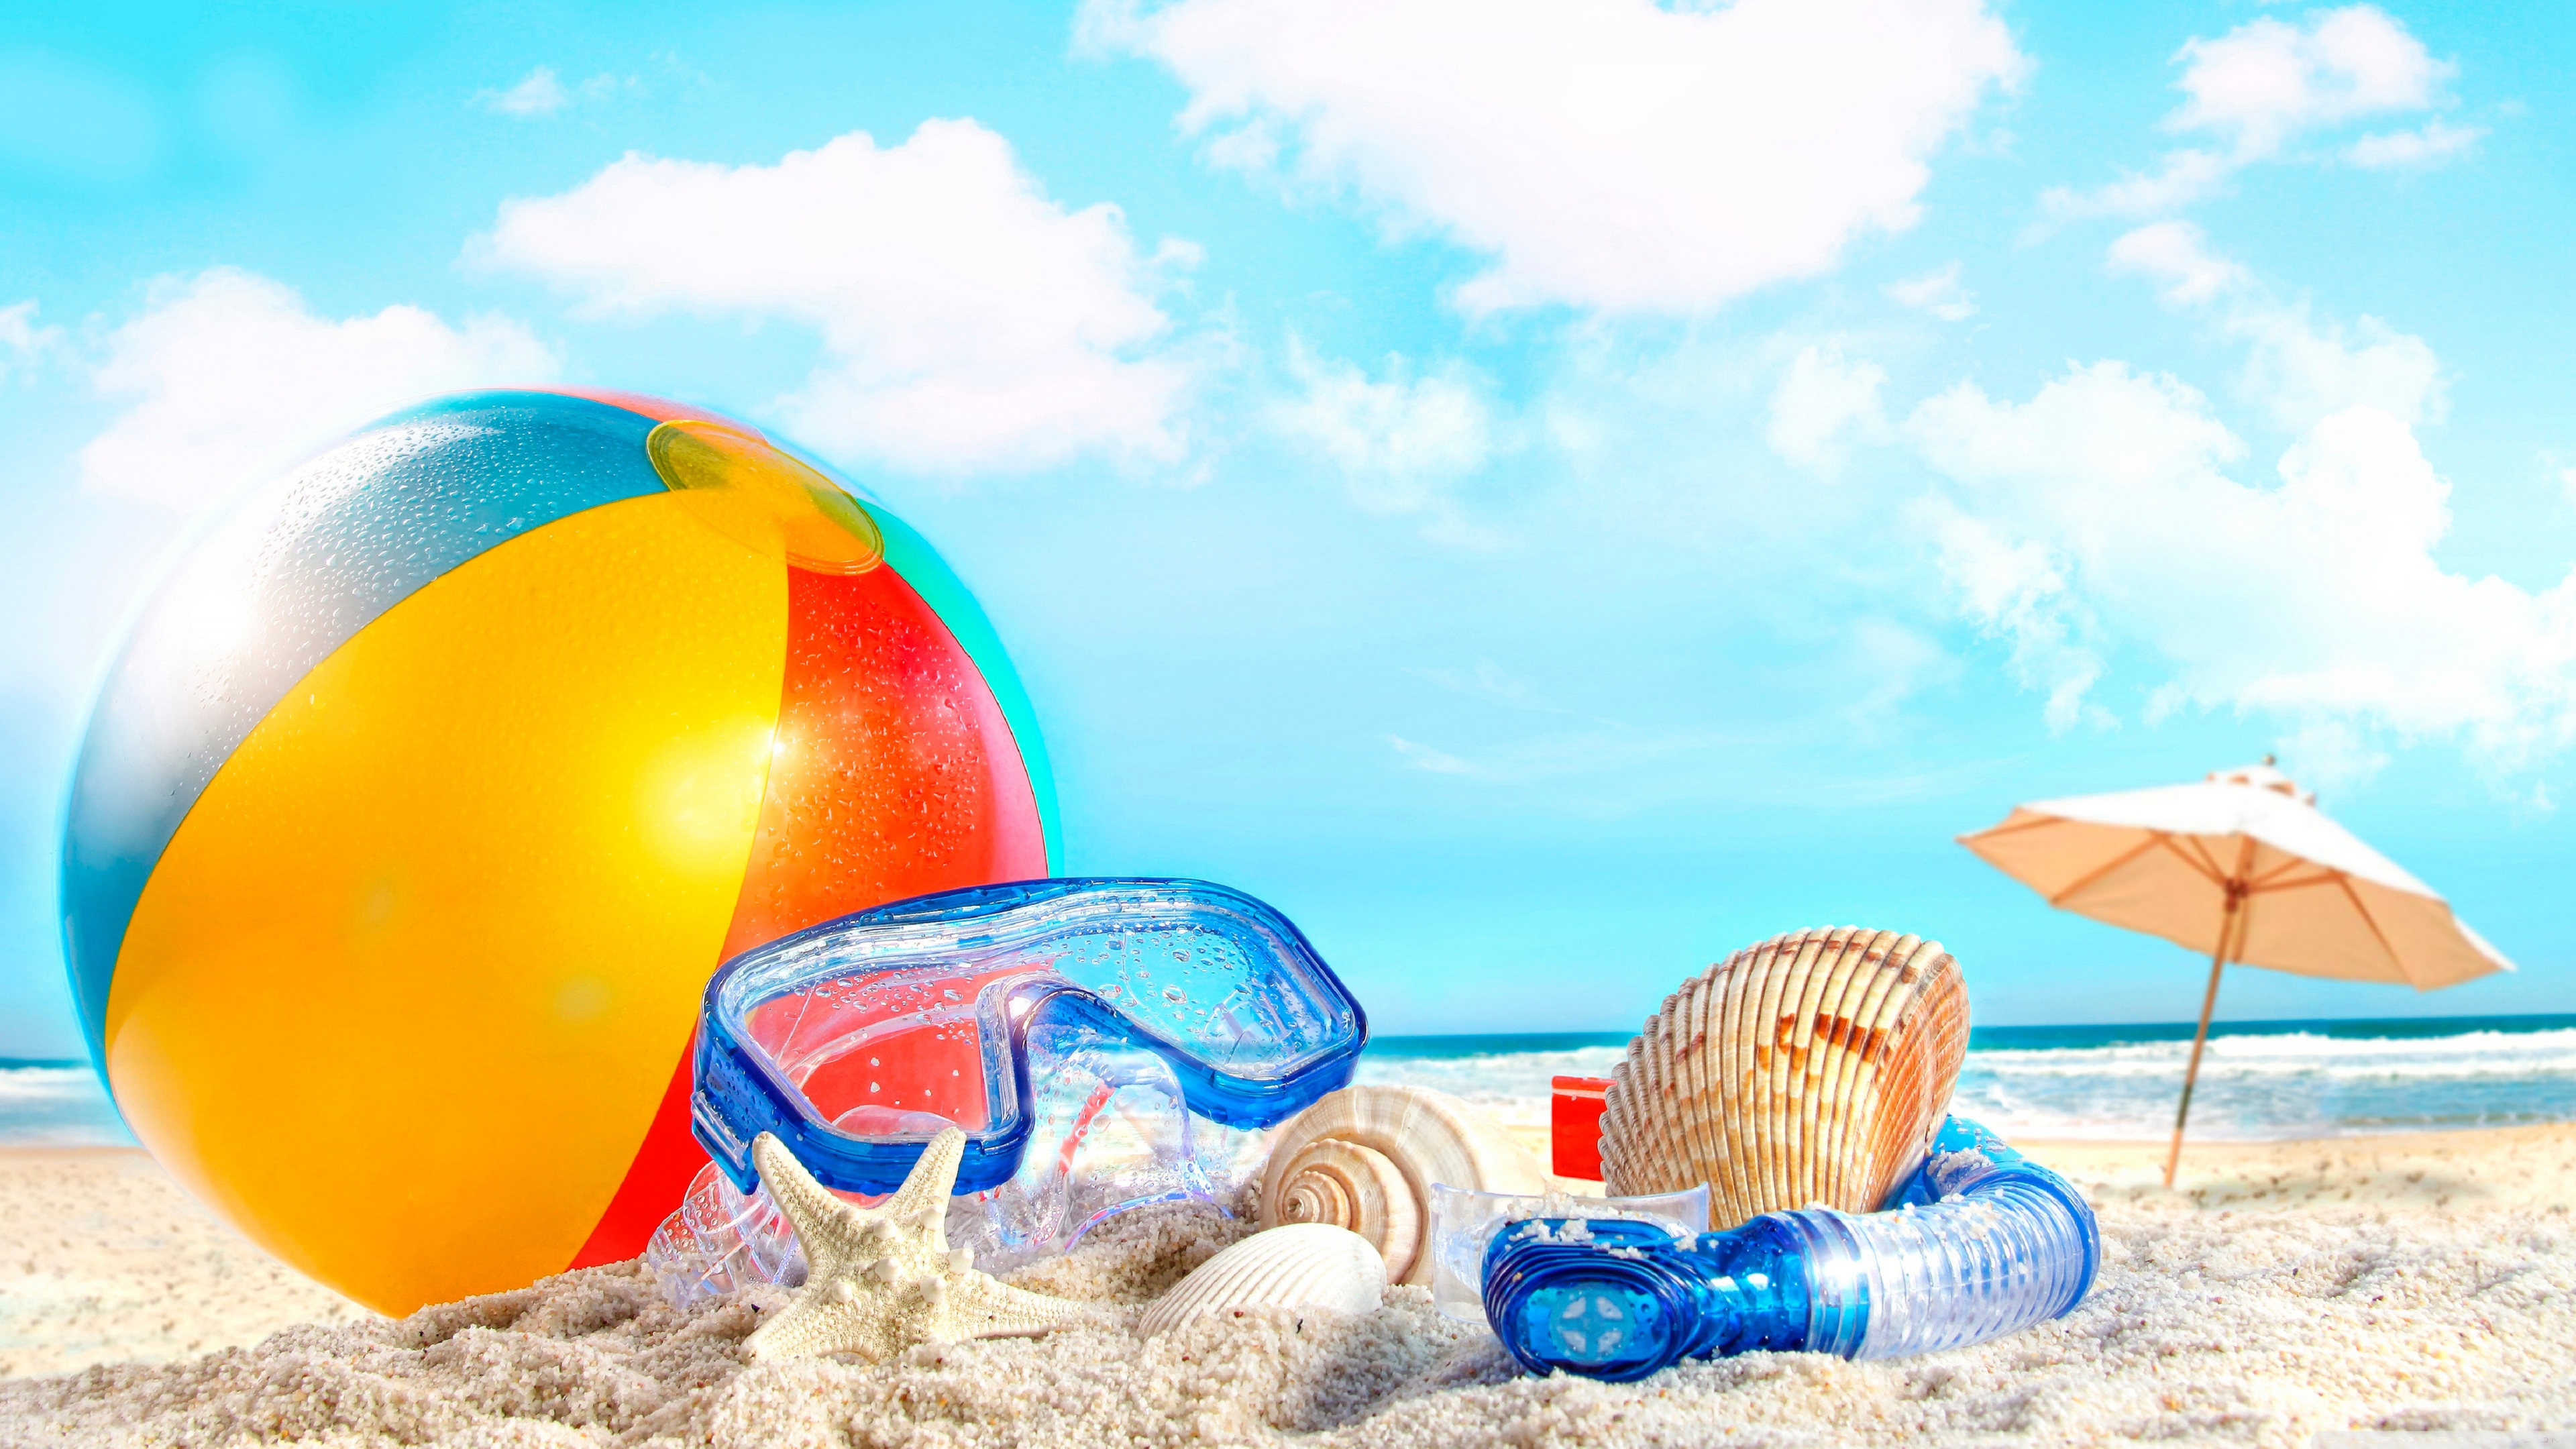 Summer vacation at sea wallpapers and images   wallpapers pictures 3840x2160